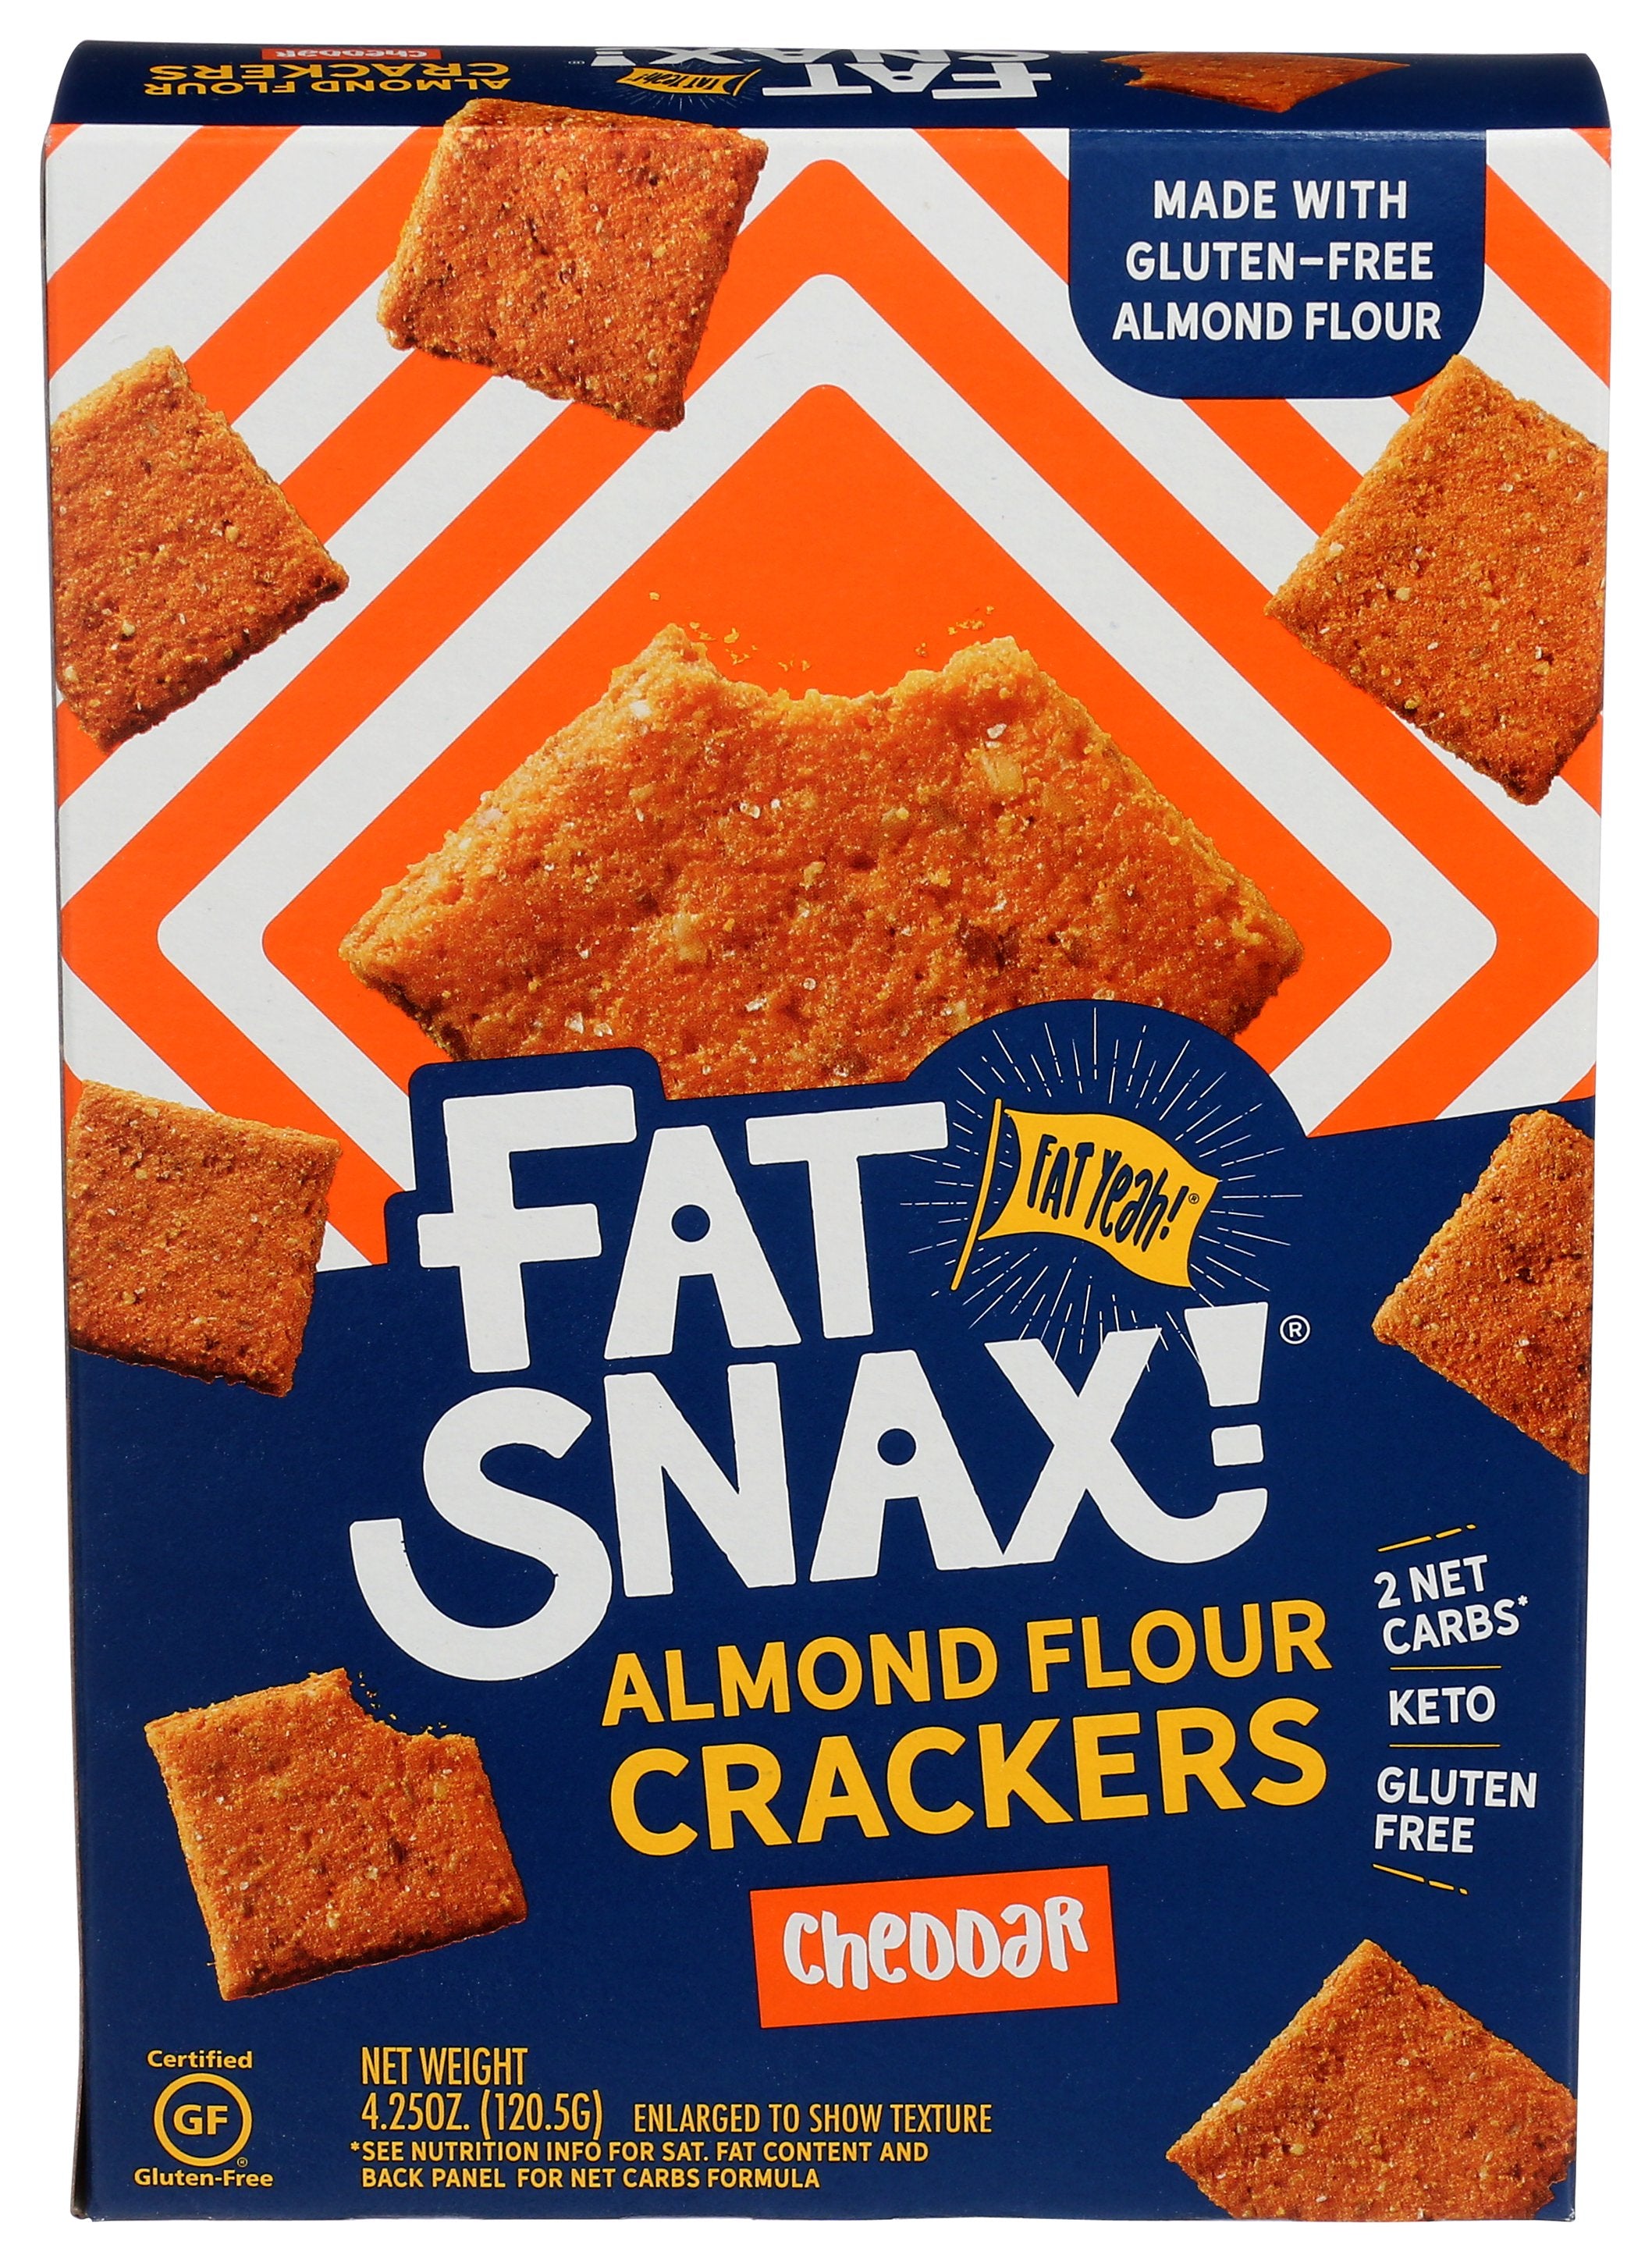 FAT SNAX CRACKERS CHEDDAR - Case of 6